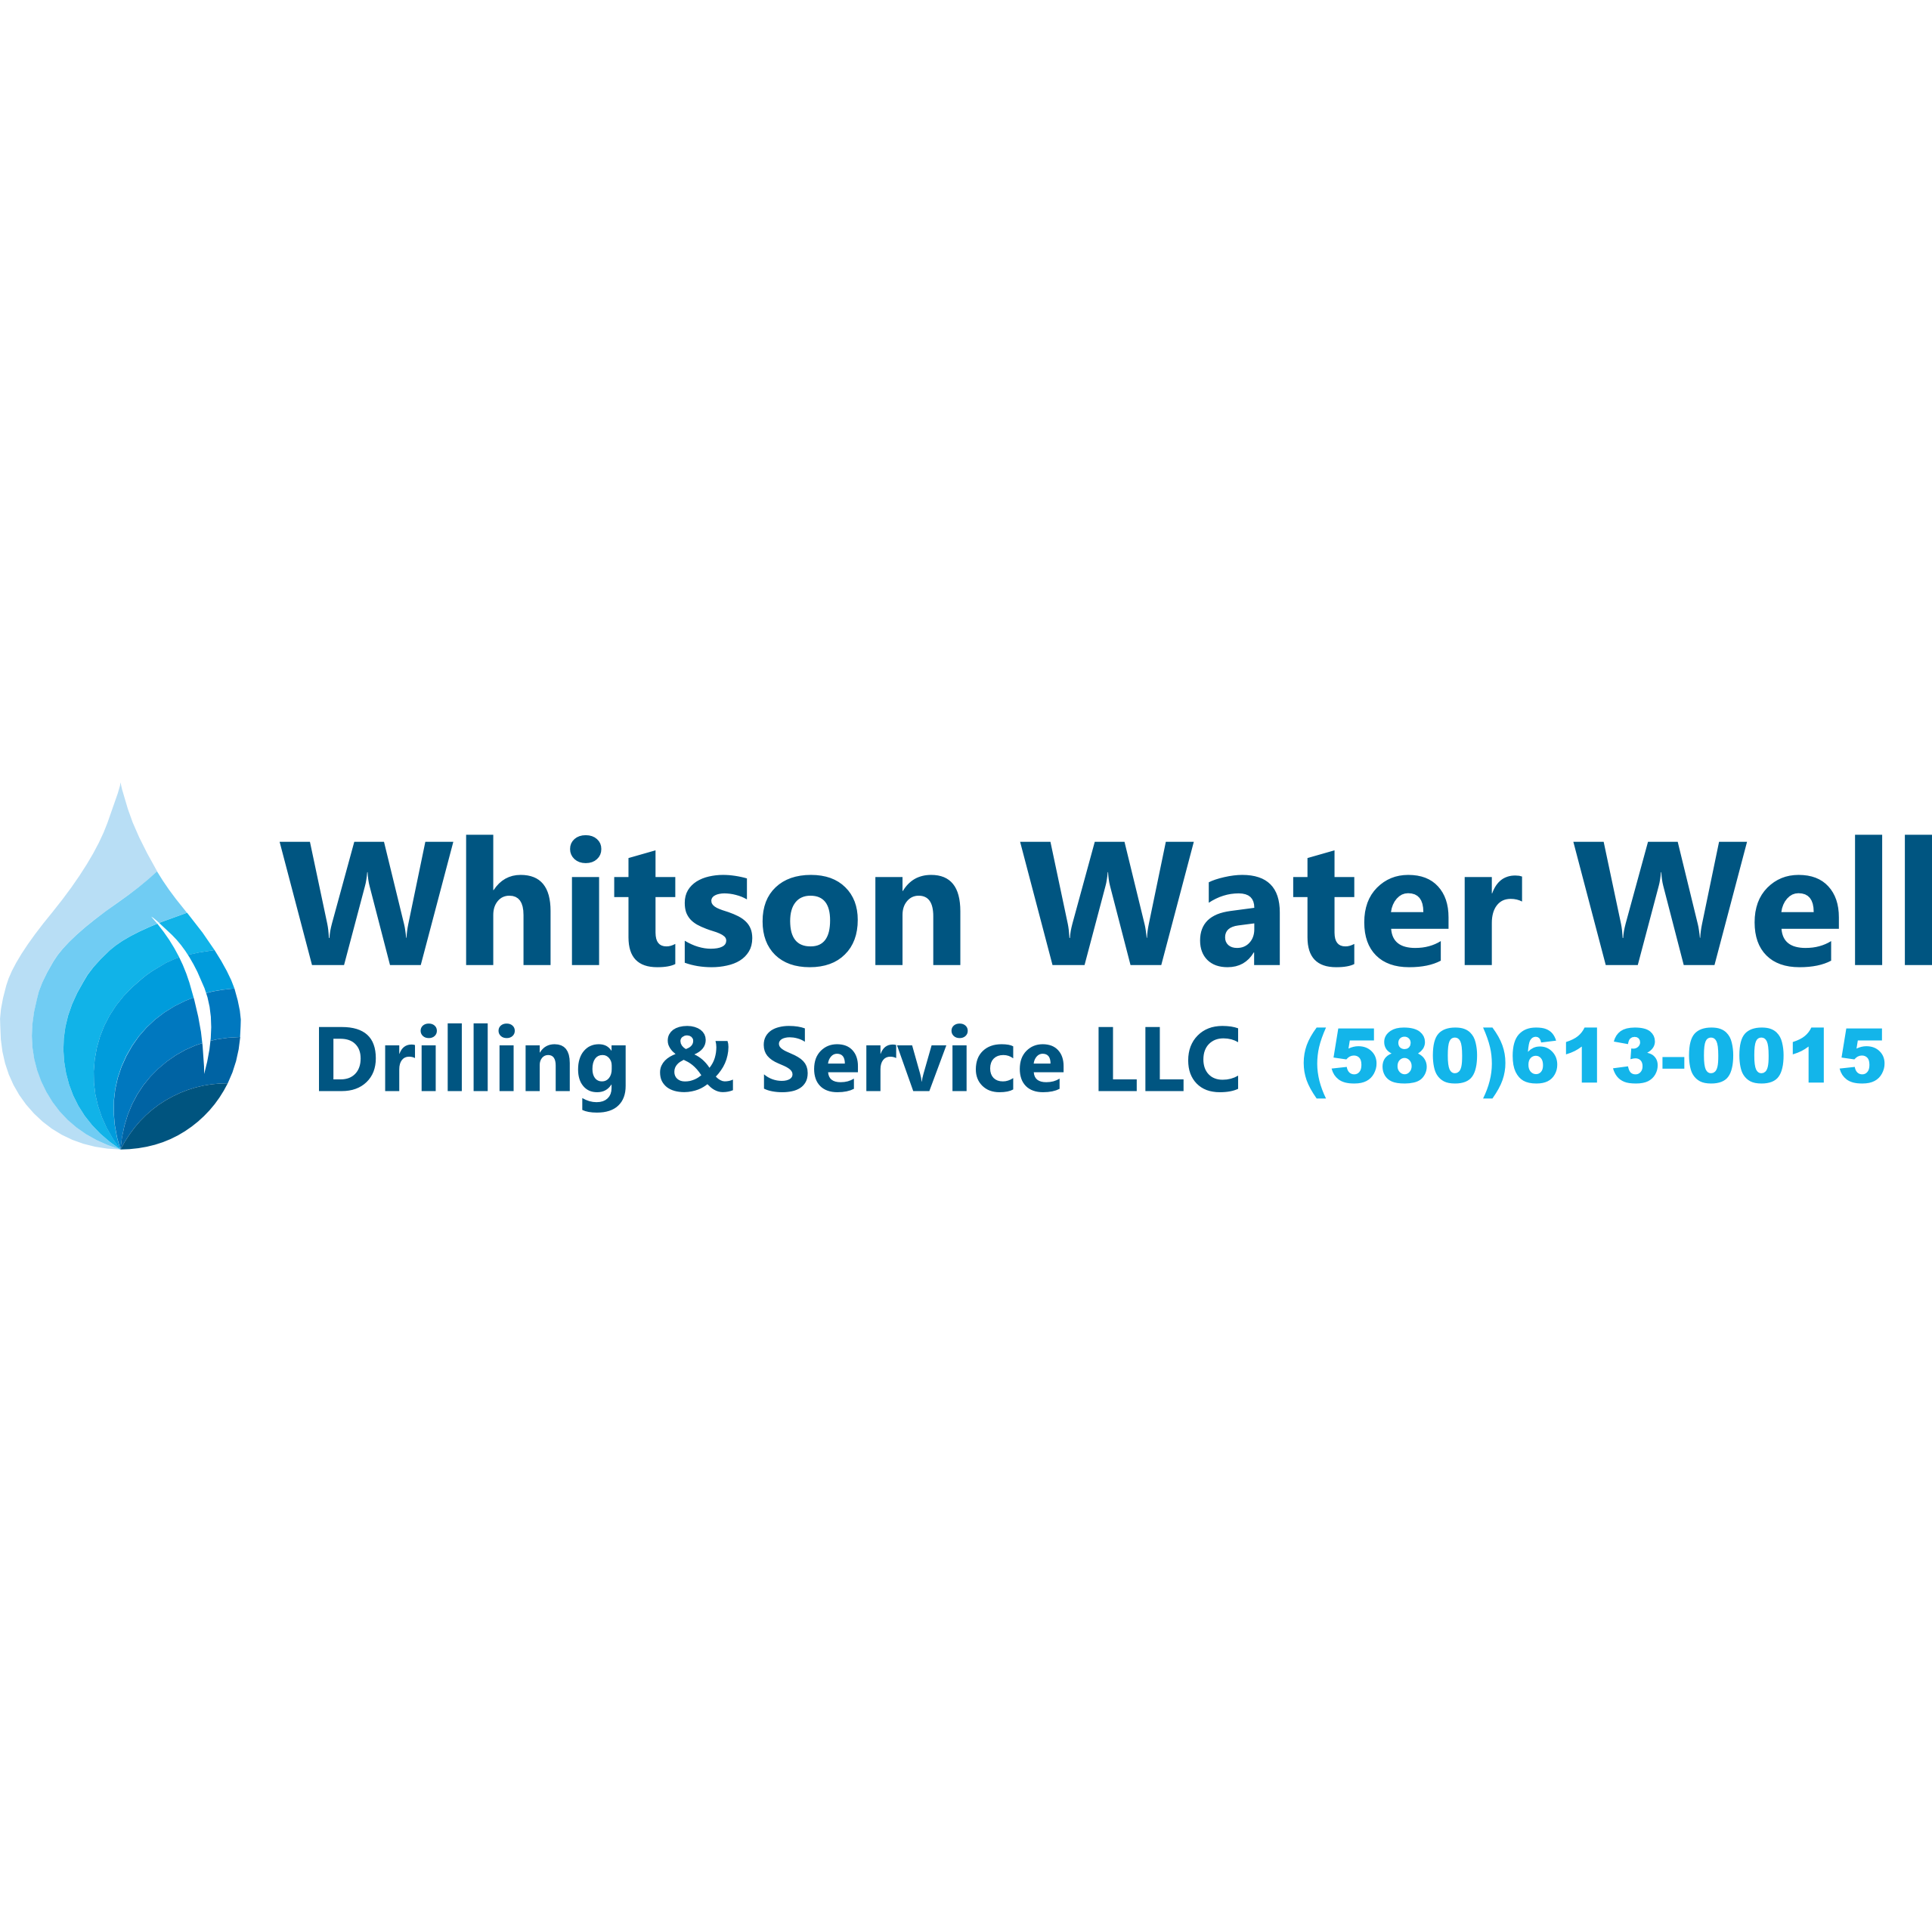 Whitson Water Well Drilling And Service LLC - Thomas, OK - (580)613-0015 | ShowMeLocal.com